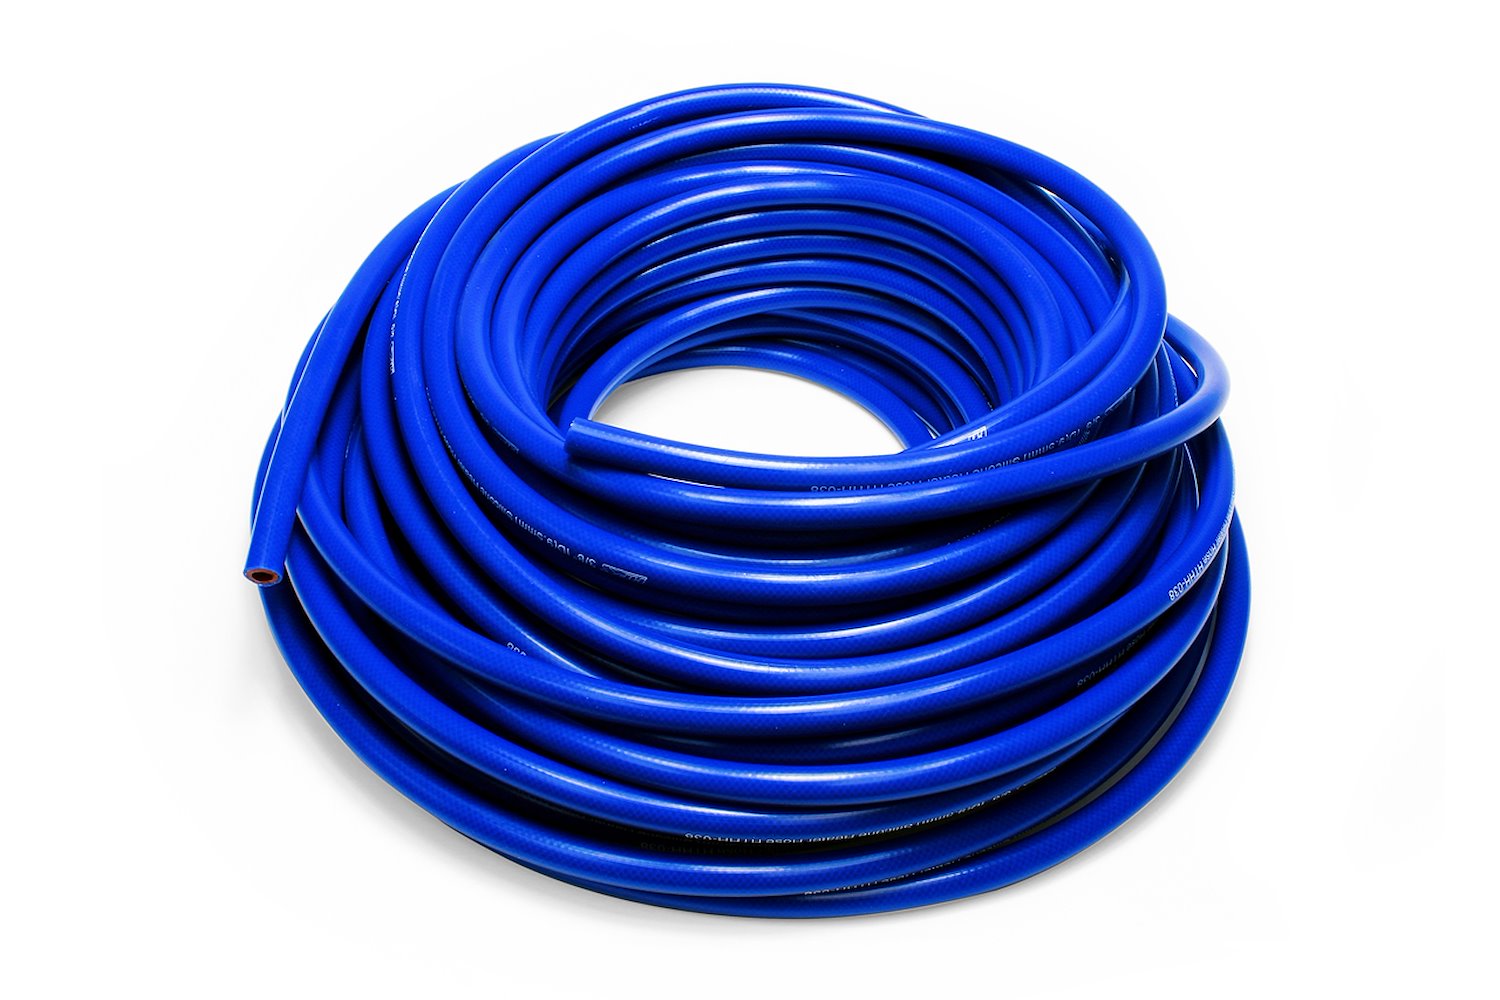 HTHH-062-BLUEx50 Silicone Heater Hose Tubing, High-Temp 1-Ply Reinforced, 5/8 in. ID, 50 ft. Roll, Blue